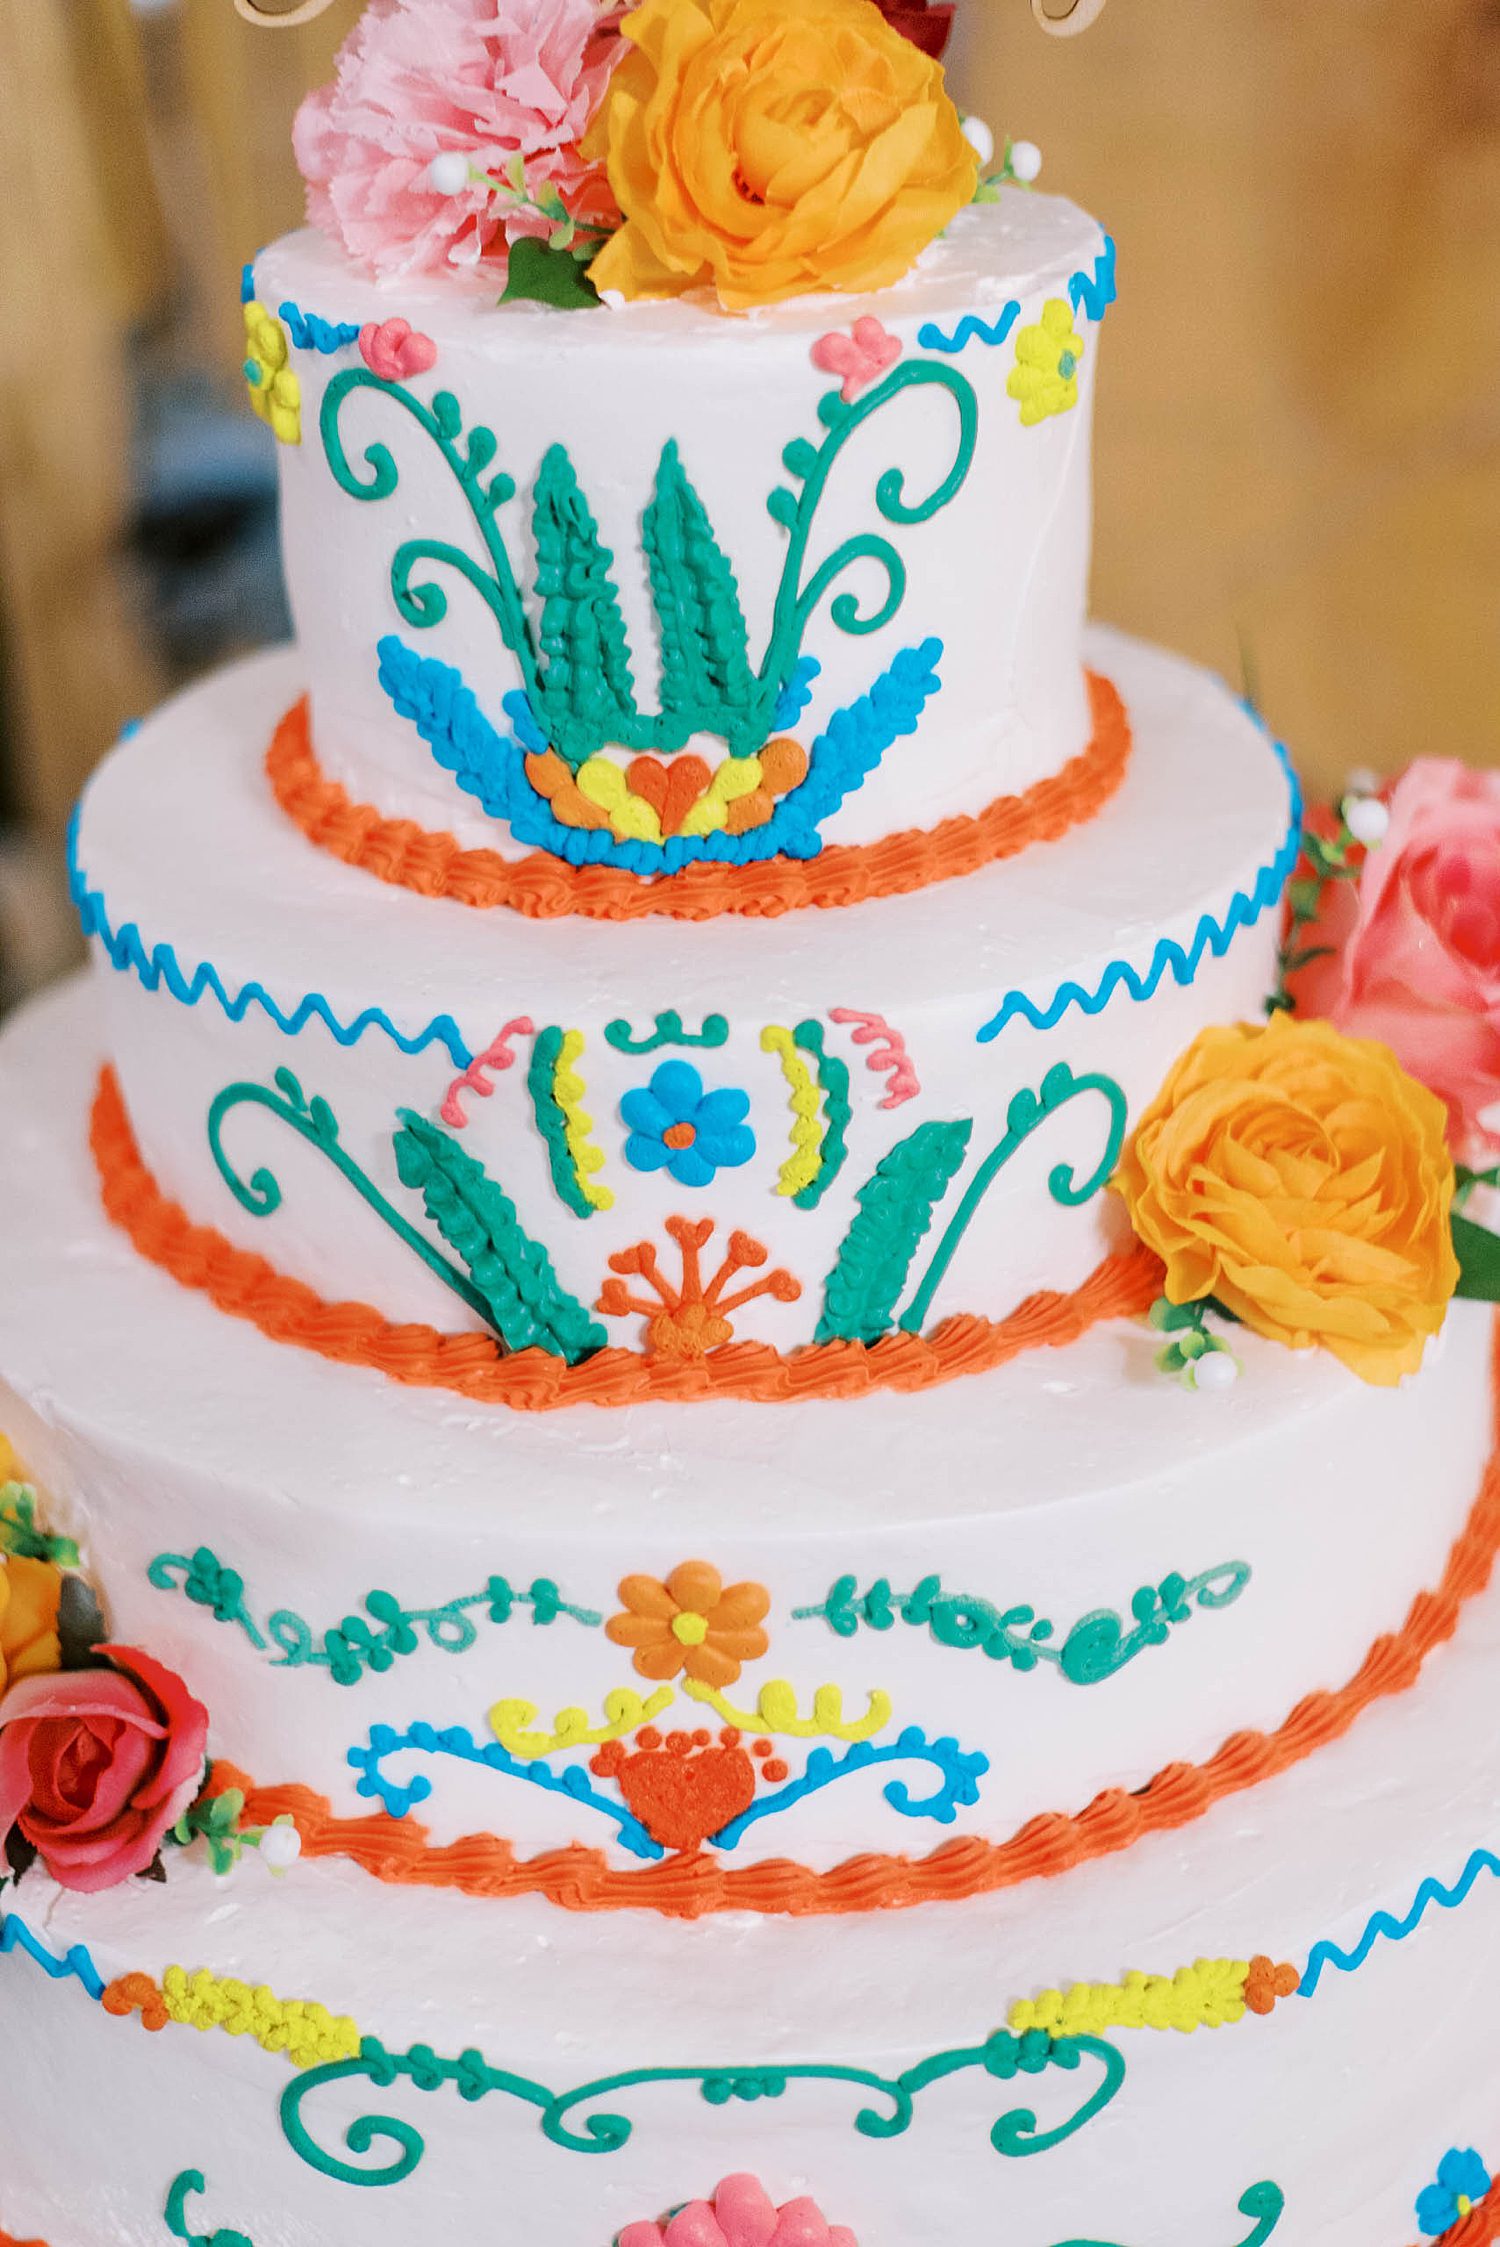 custom wedding cake with bright colors and traditional Mexican designs